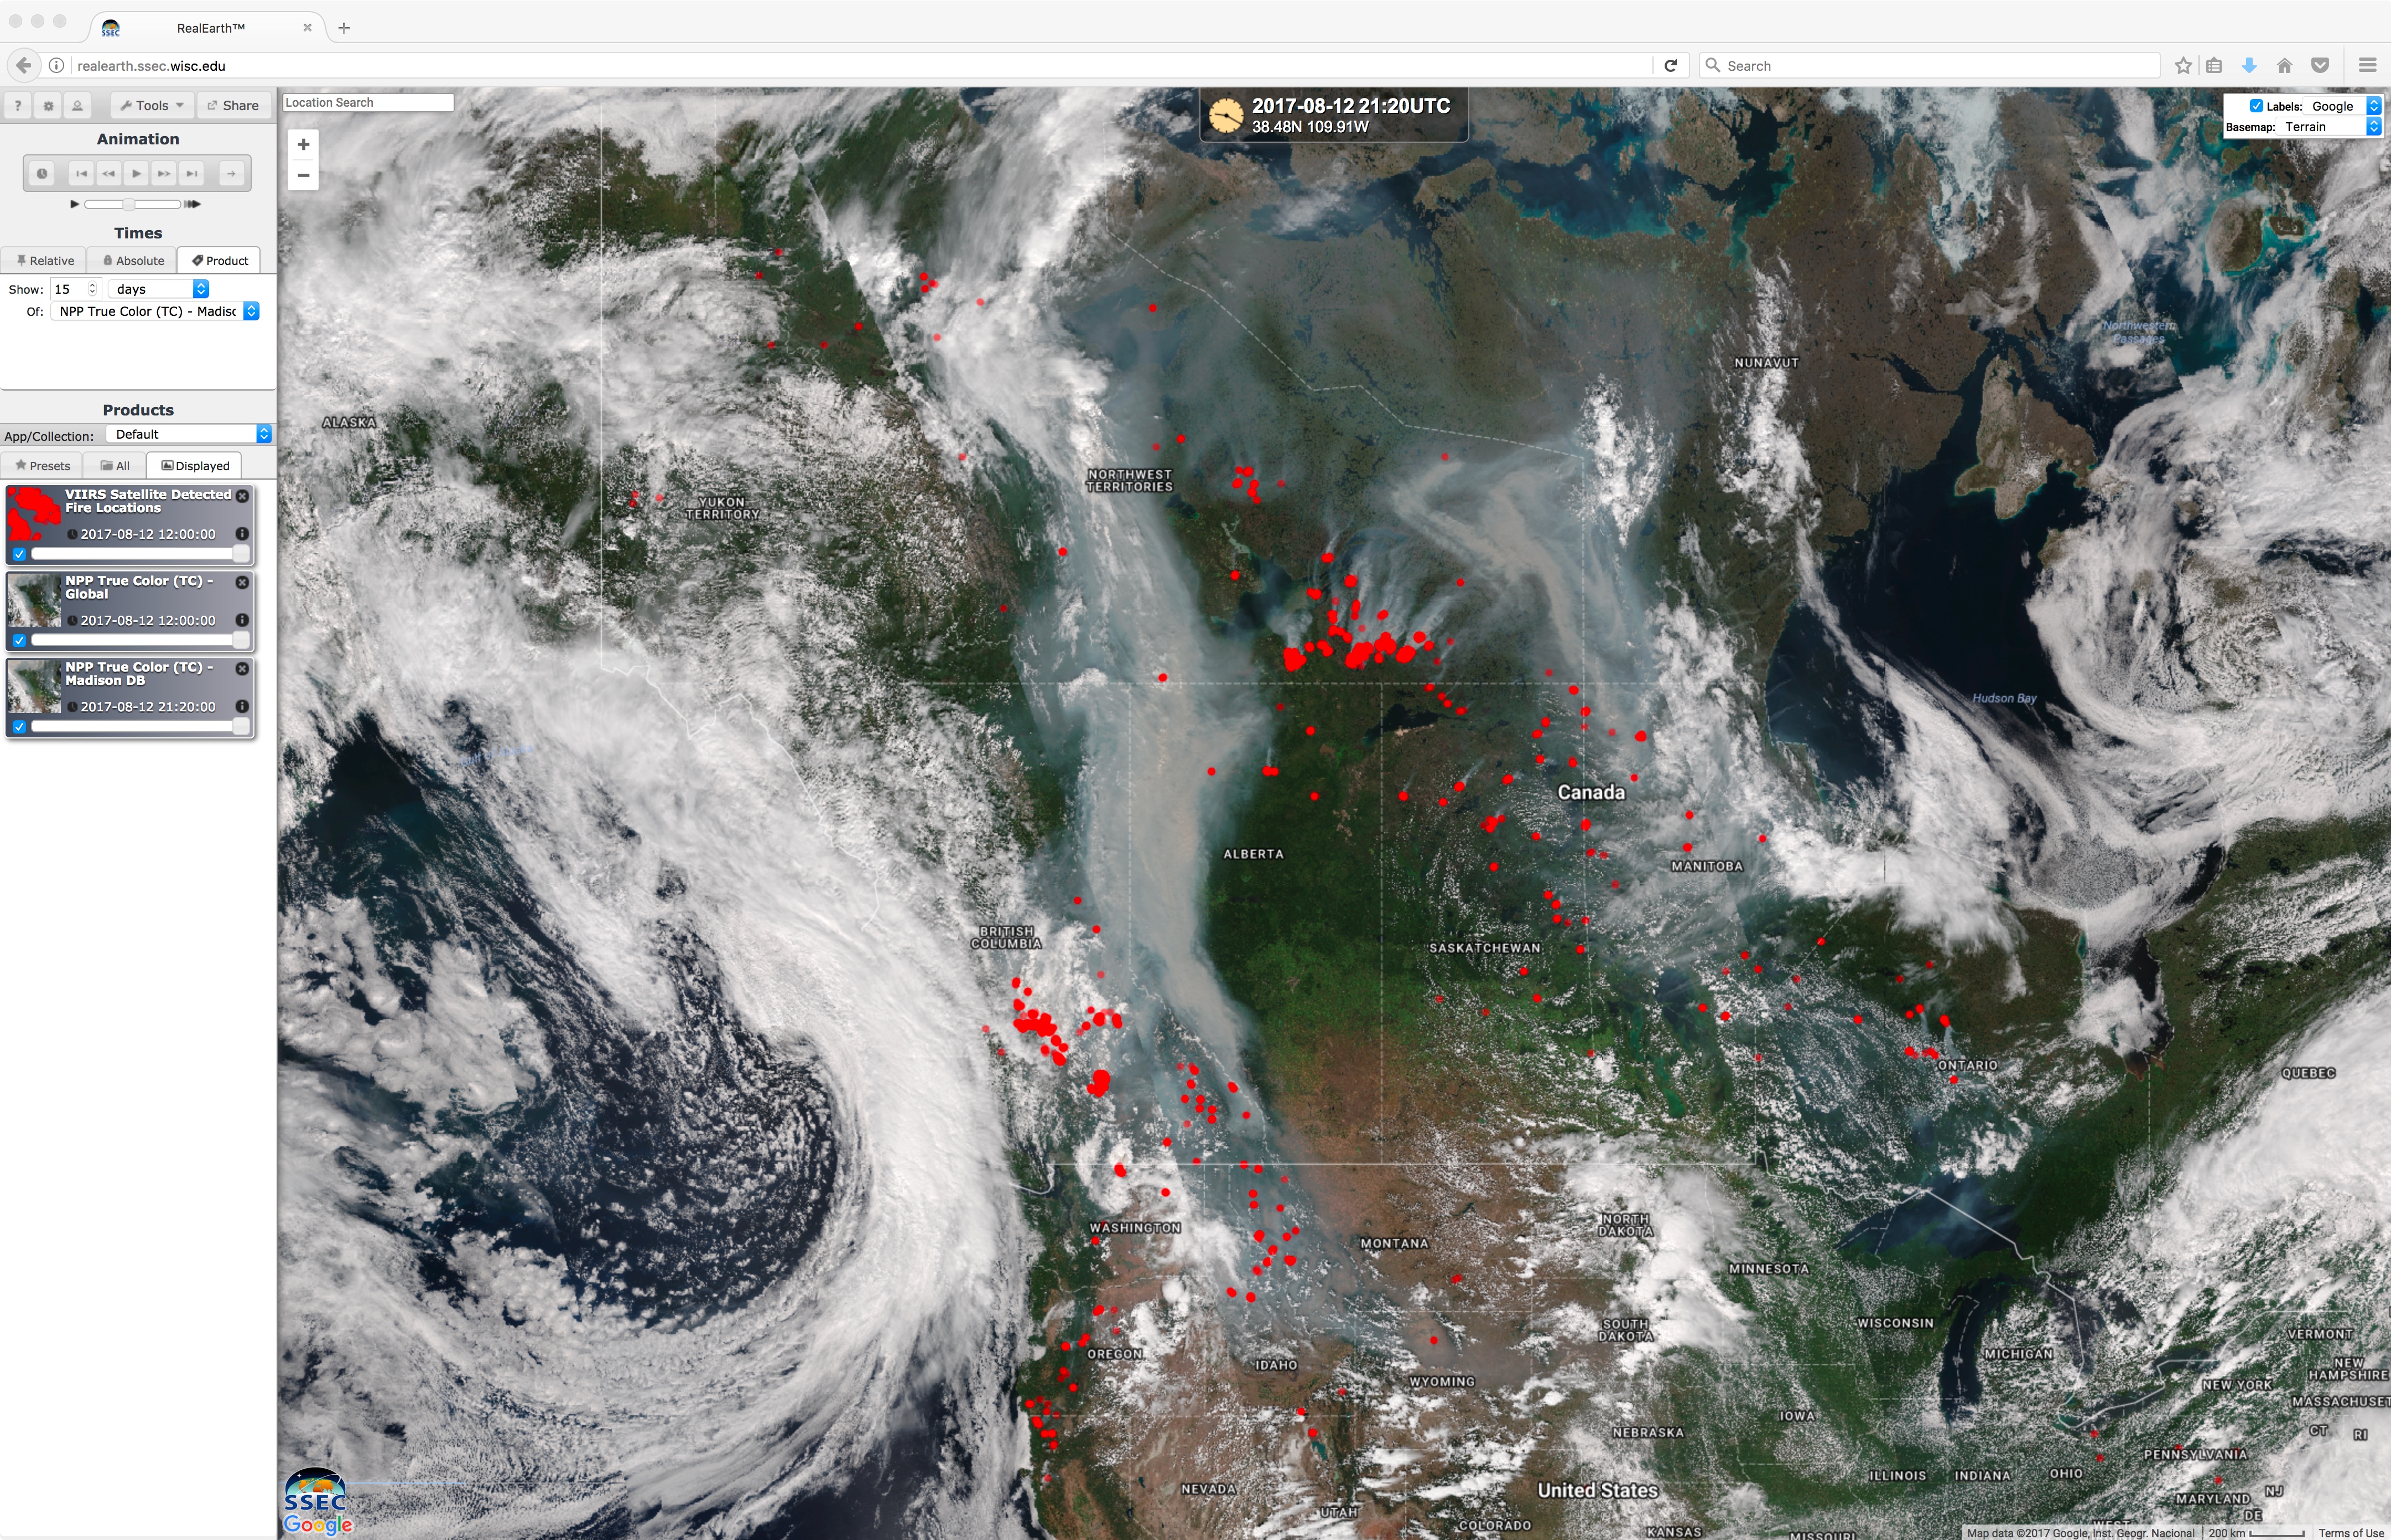 Suomi NPP VIIRS true-color image, with VIIRS-detected fire locations plotted in red [click to enlarge]